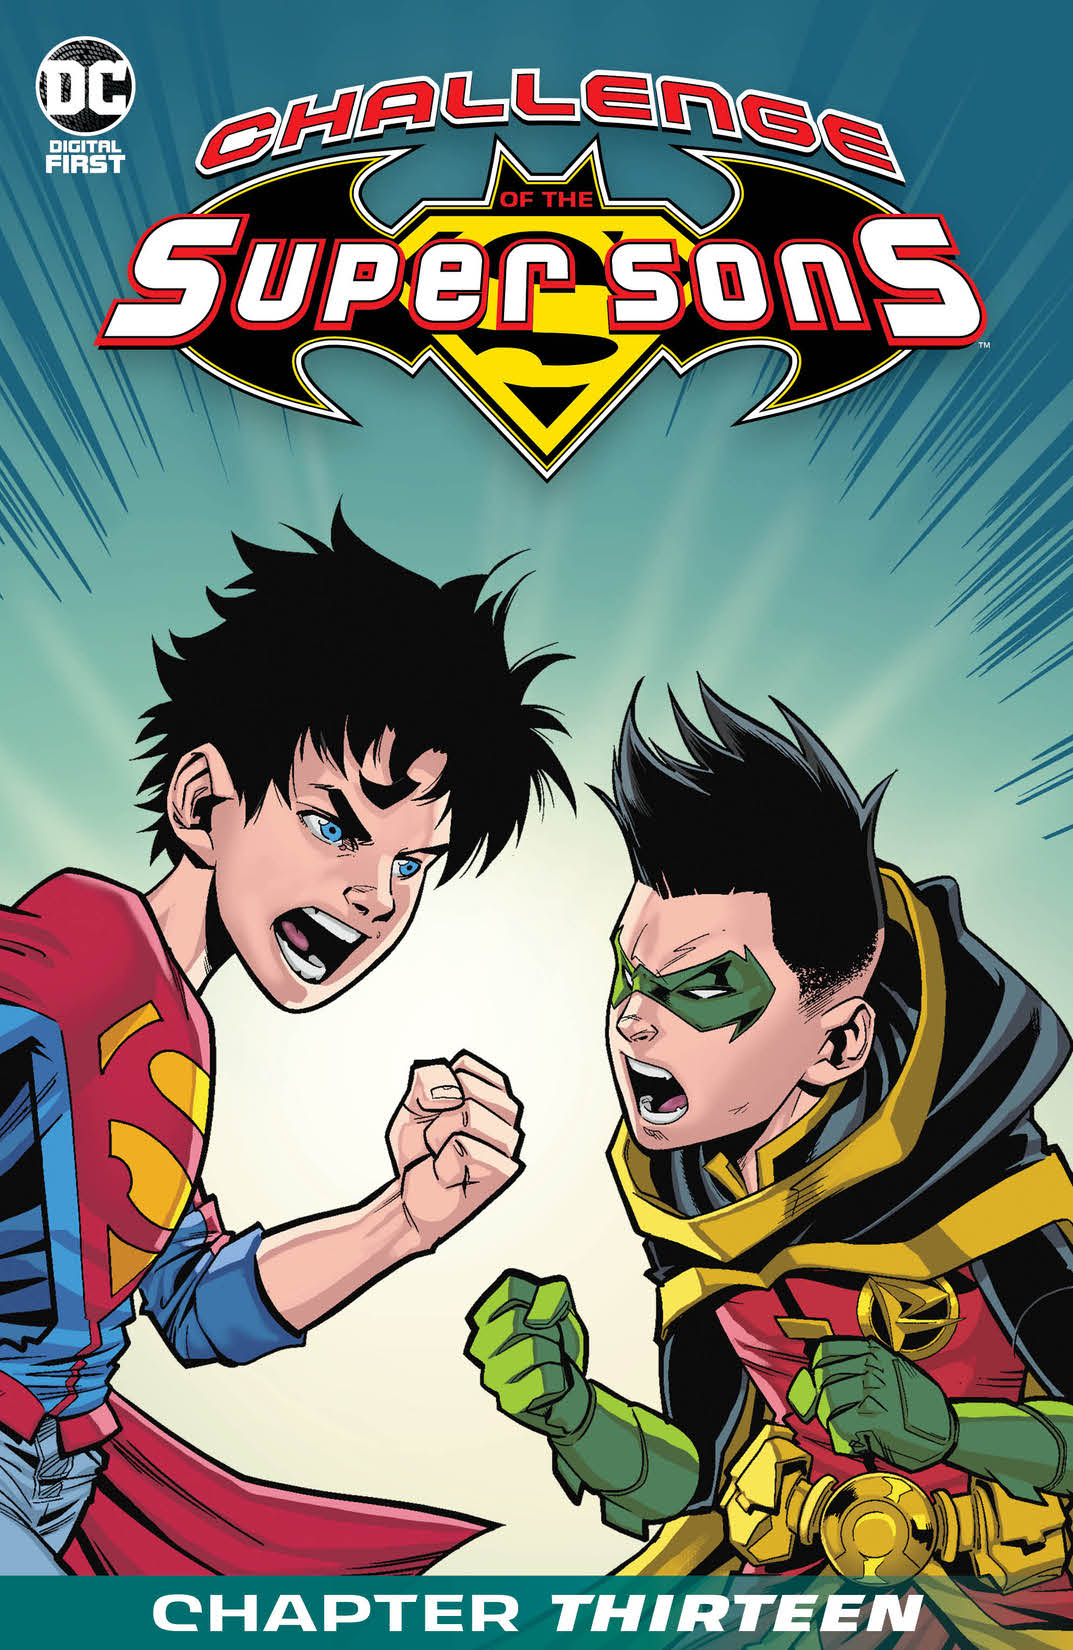 Challenge of the Super Sons #13 preview images